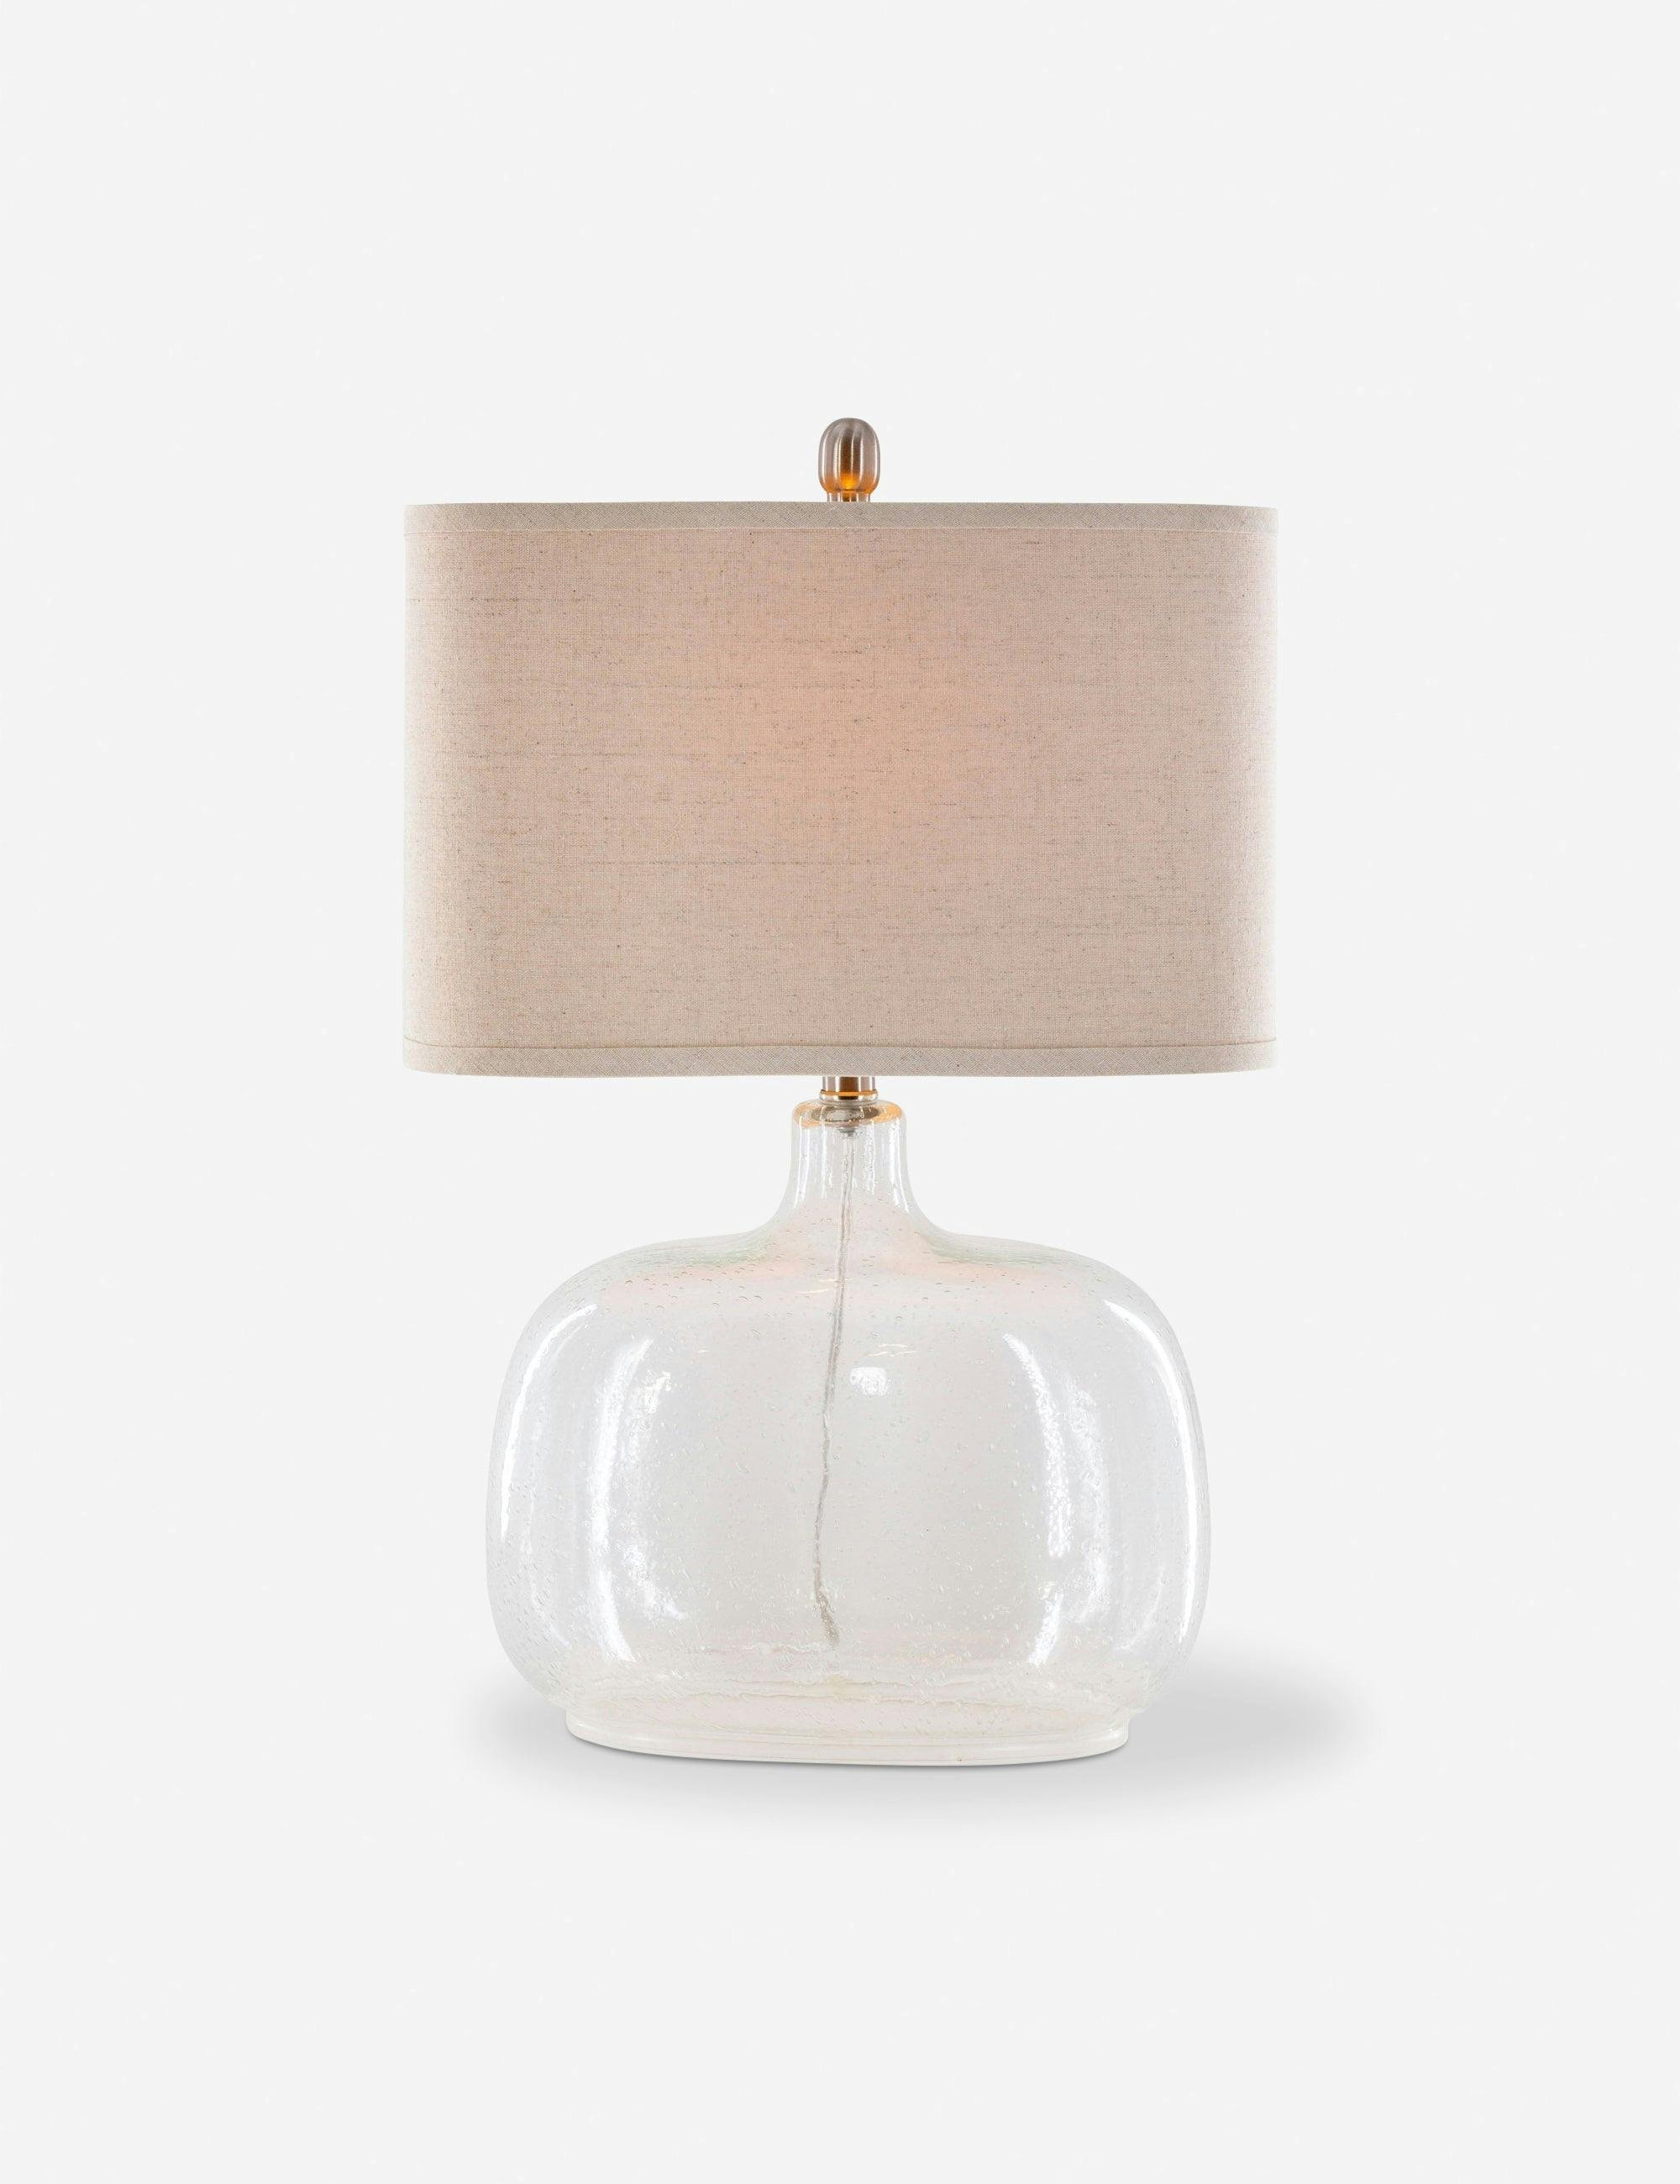 Bentley Moody Grey Glass Table Lamp with Beige Linen Shade